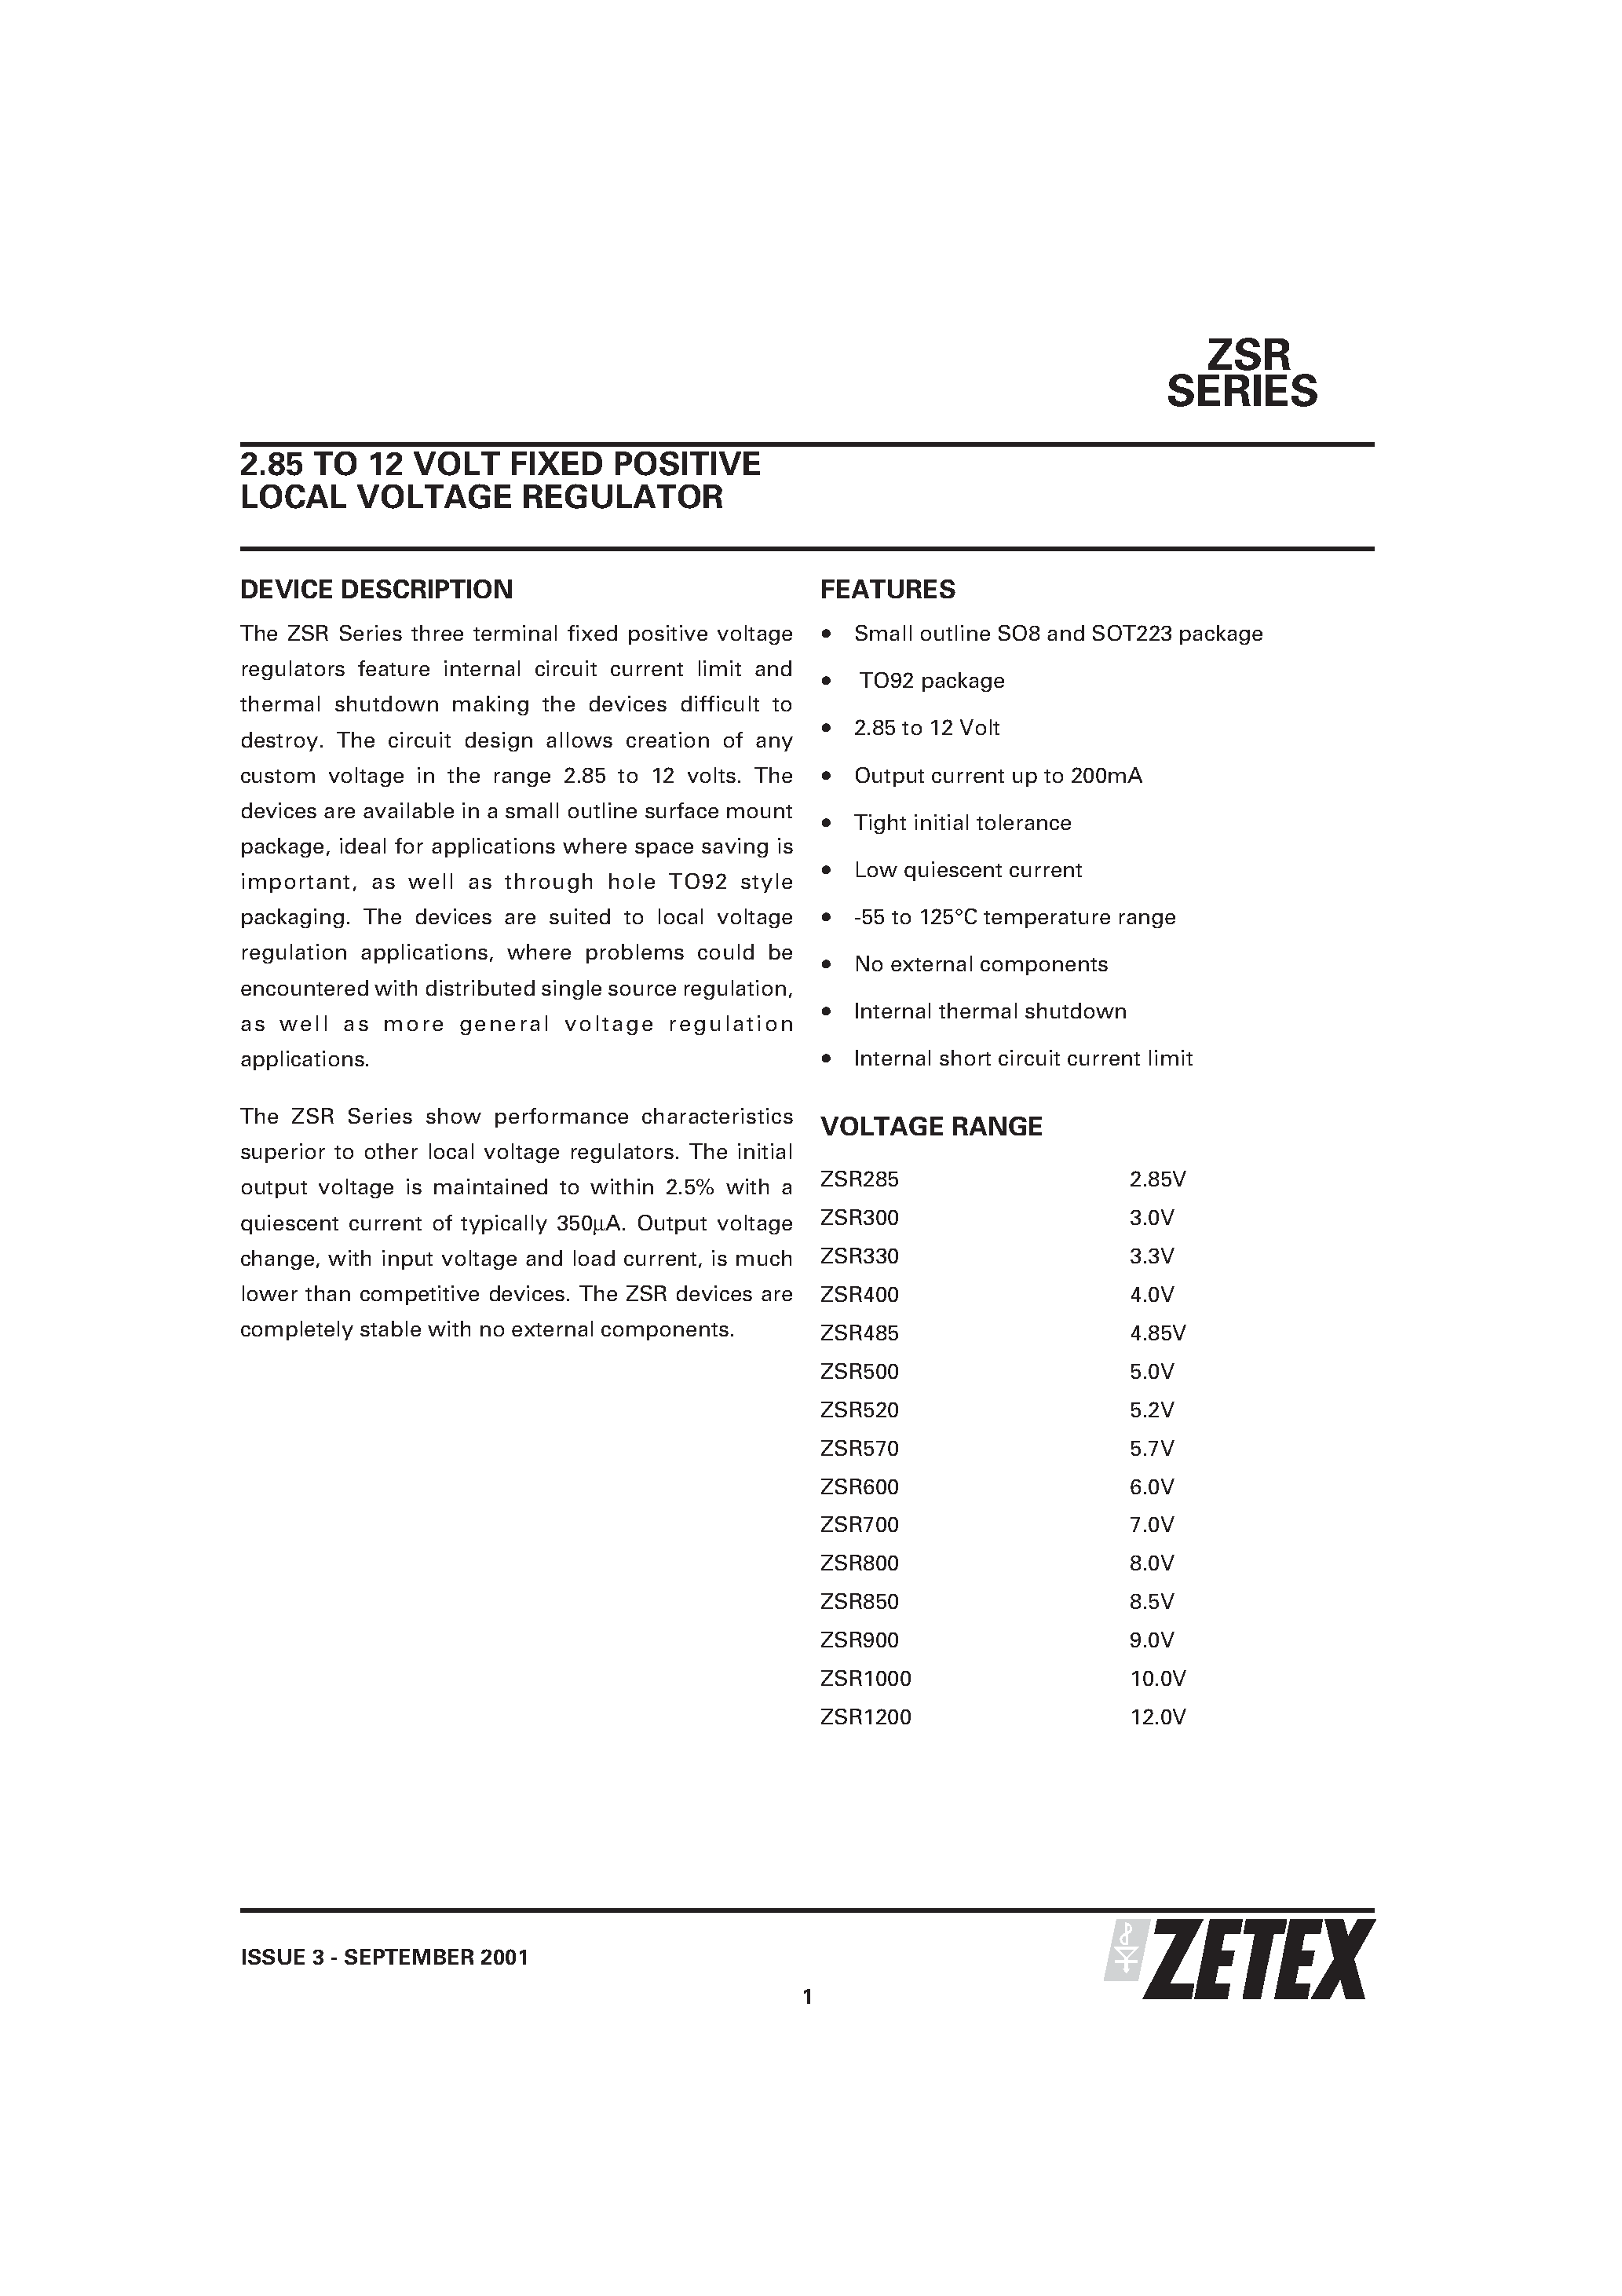 Datasheet ZSR1200C - 2.85 TO 12 VOLT FIXED POSITIVE LOCAL VOLTAGE REGULATOR page 1